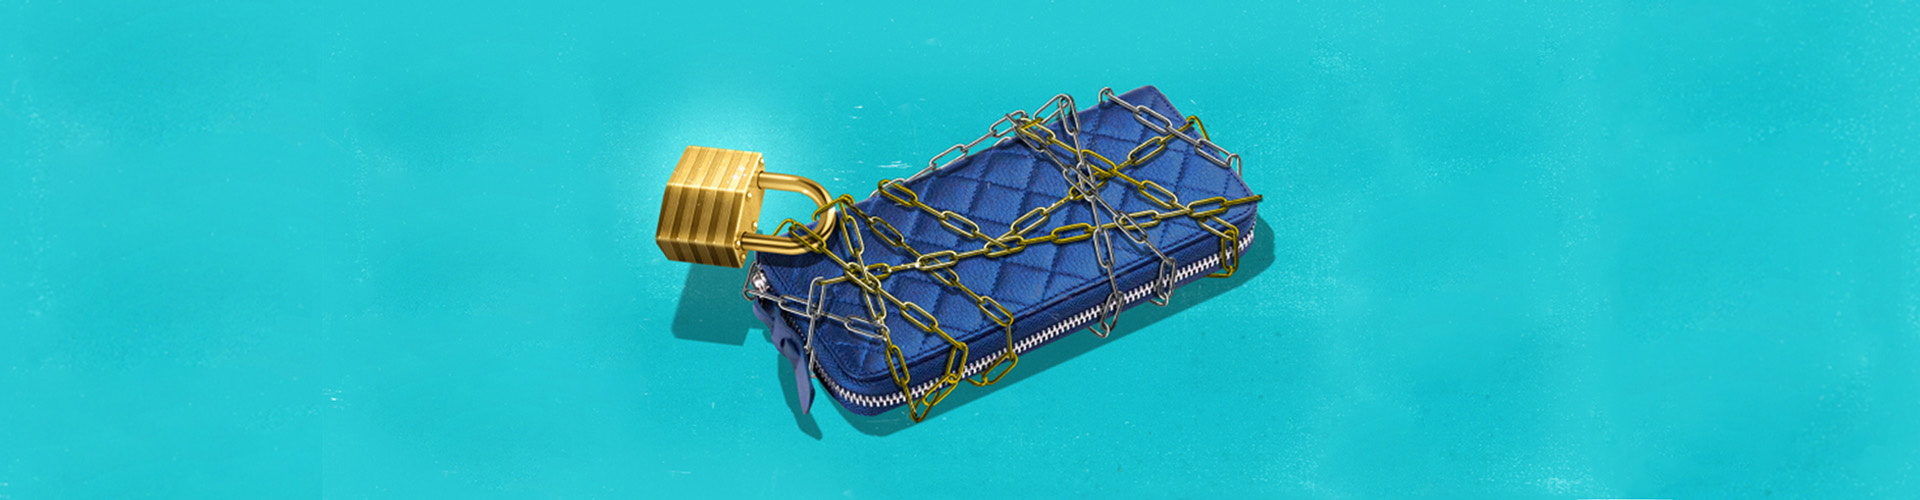 Teal background with blue satin wallet wrapped in gold chain and lock - banner